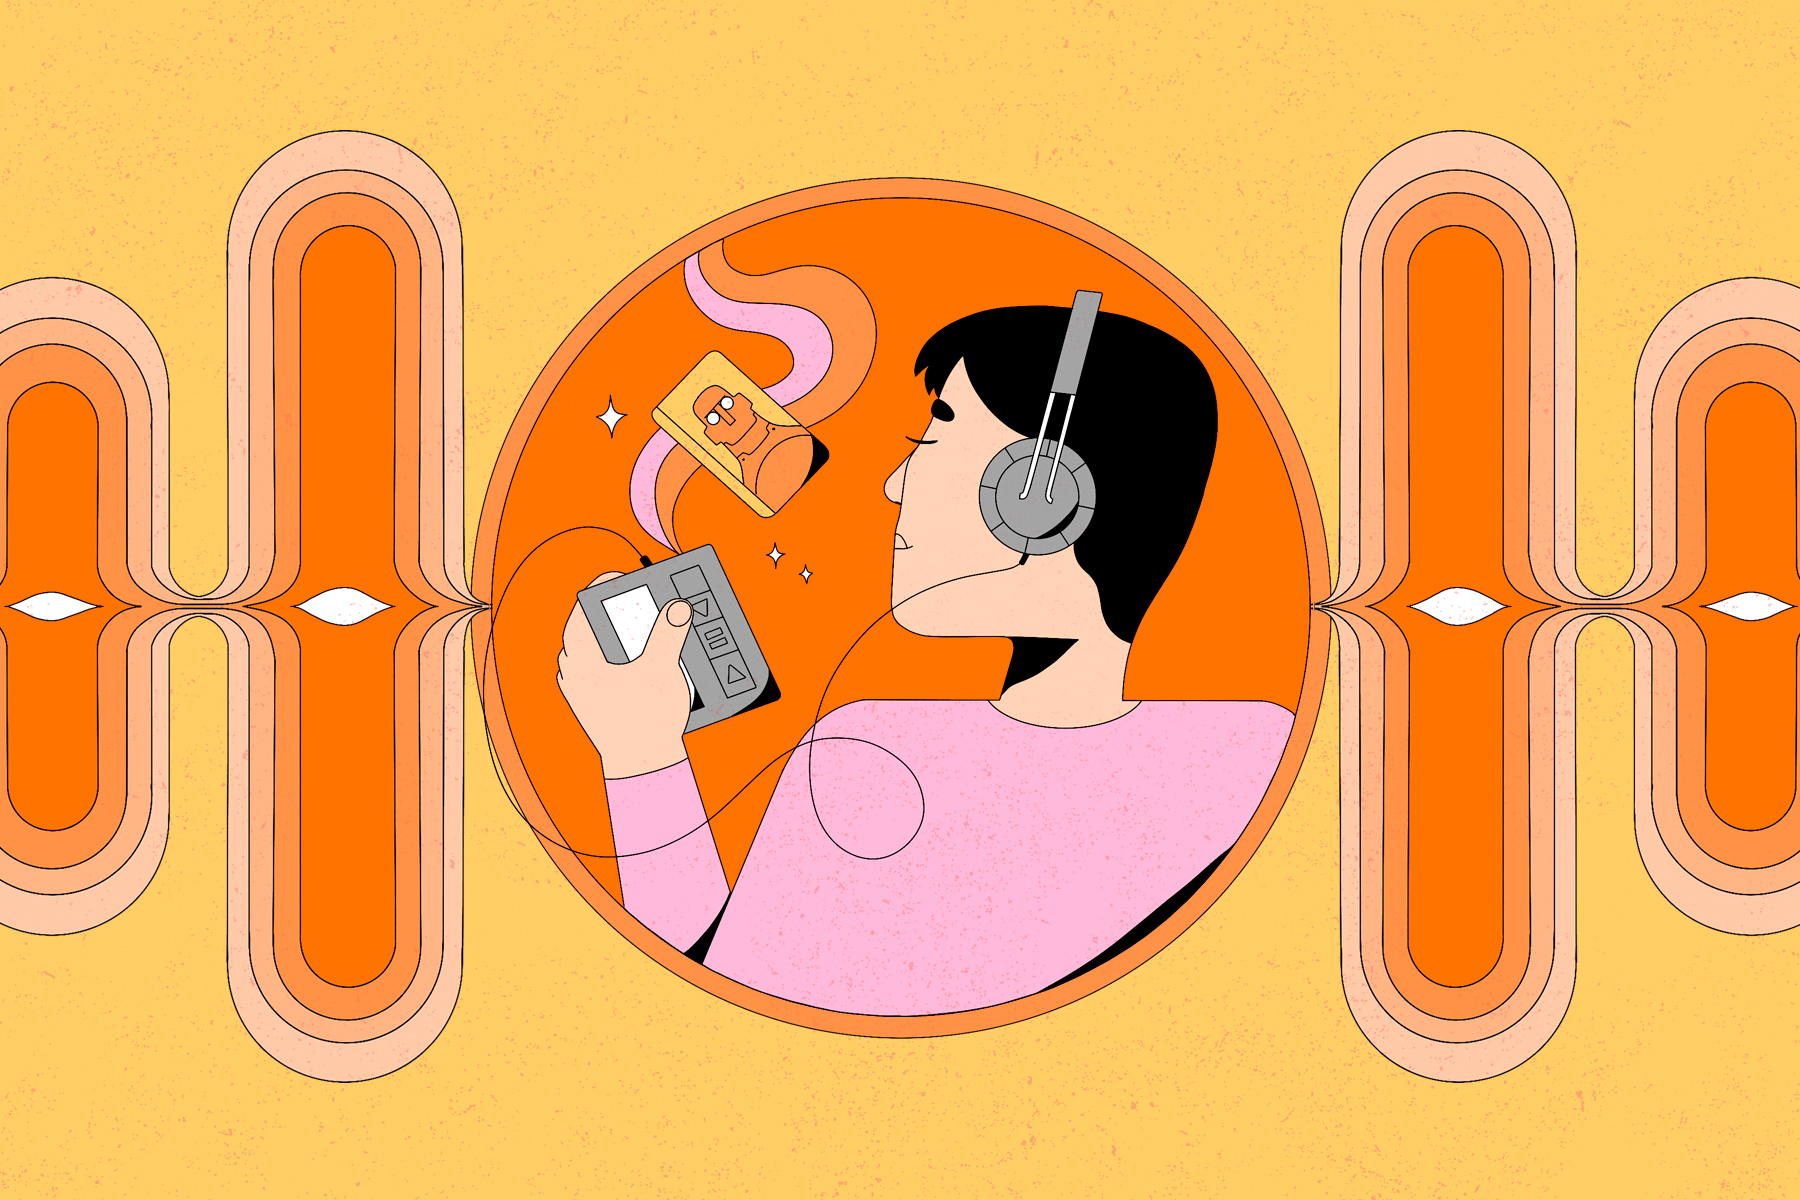 An illustration showing a young boy listening to an cassette tape audiobook of The Iron Man by Ted Hughes via headphones. Seen against a pale yellow background with a soundwave pattern either side of the illustration of the boy.